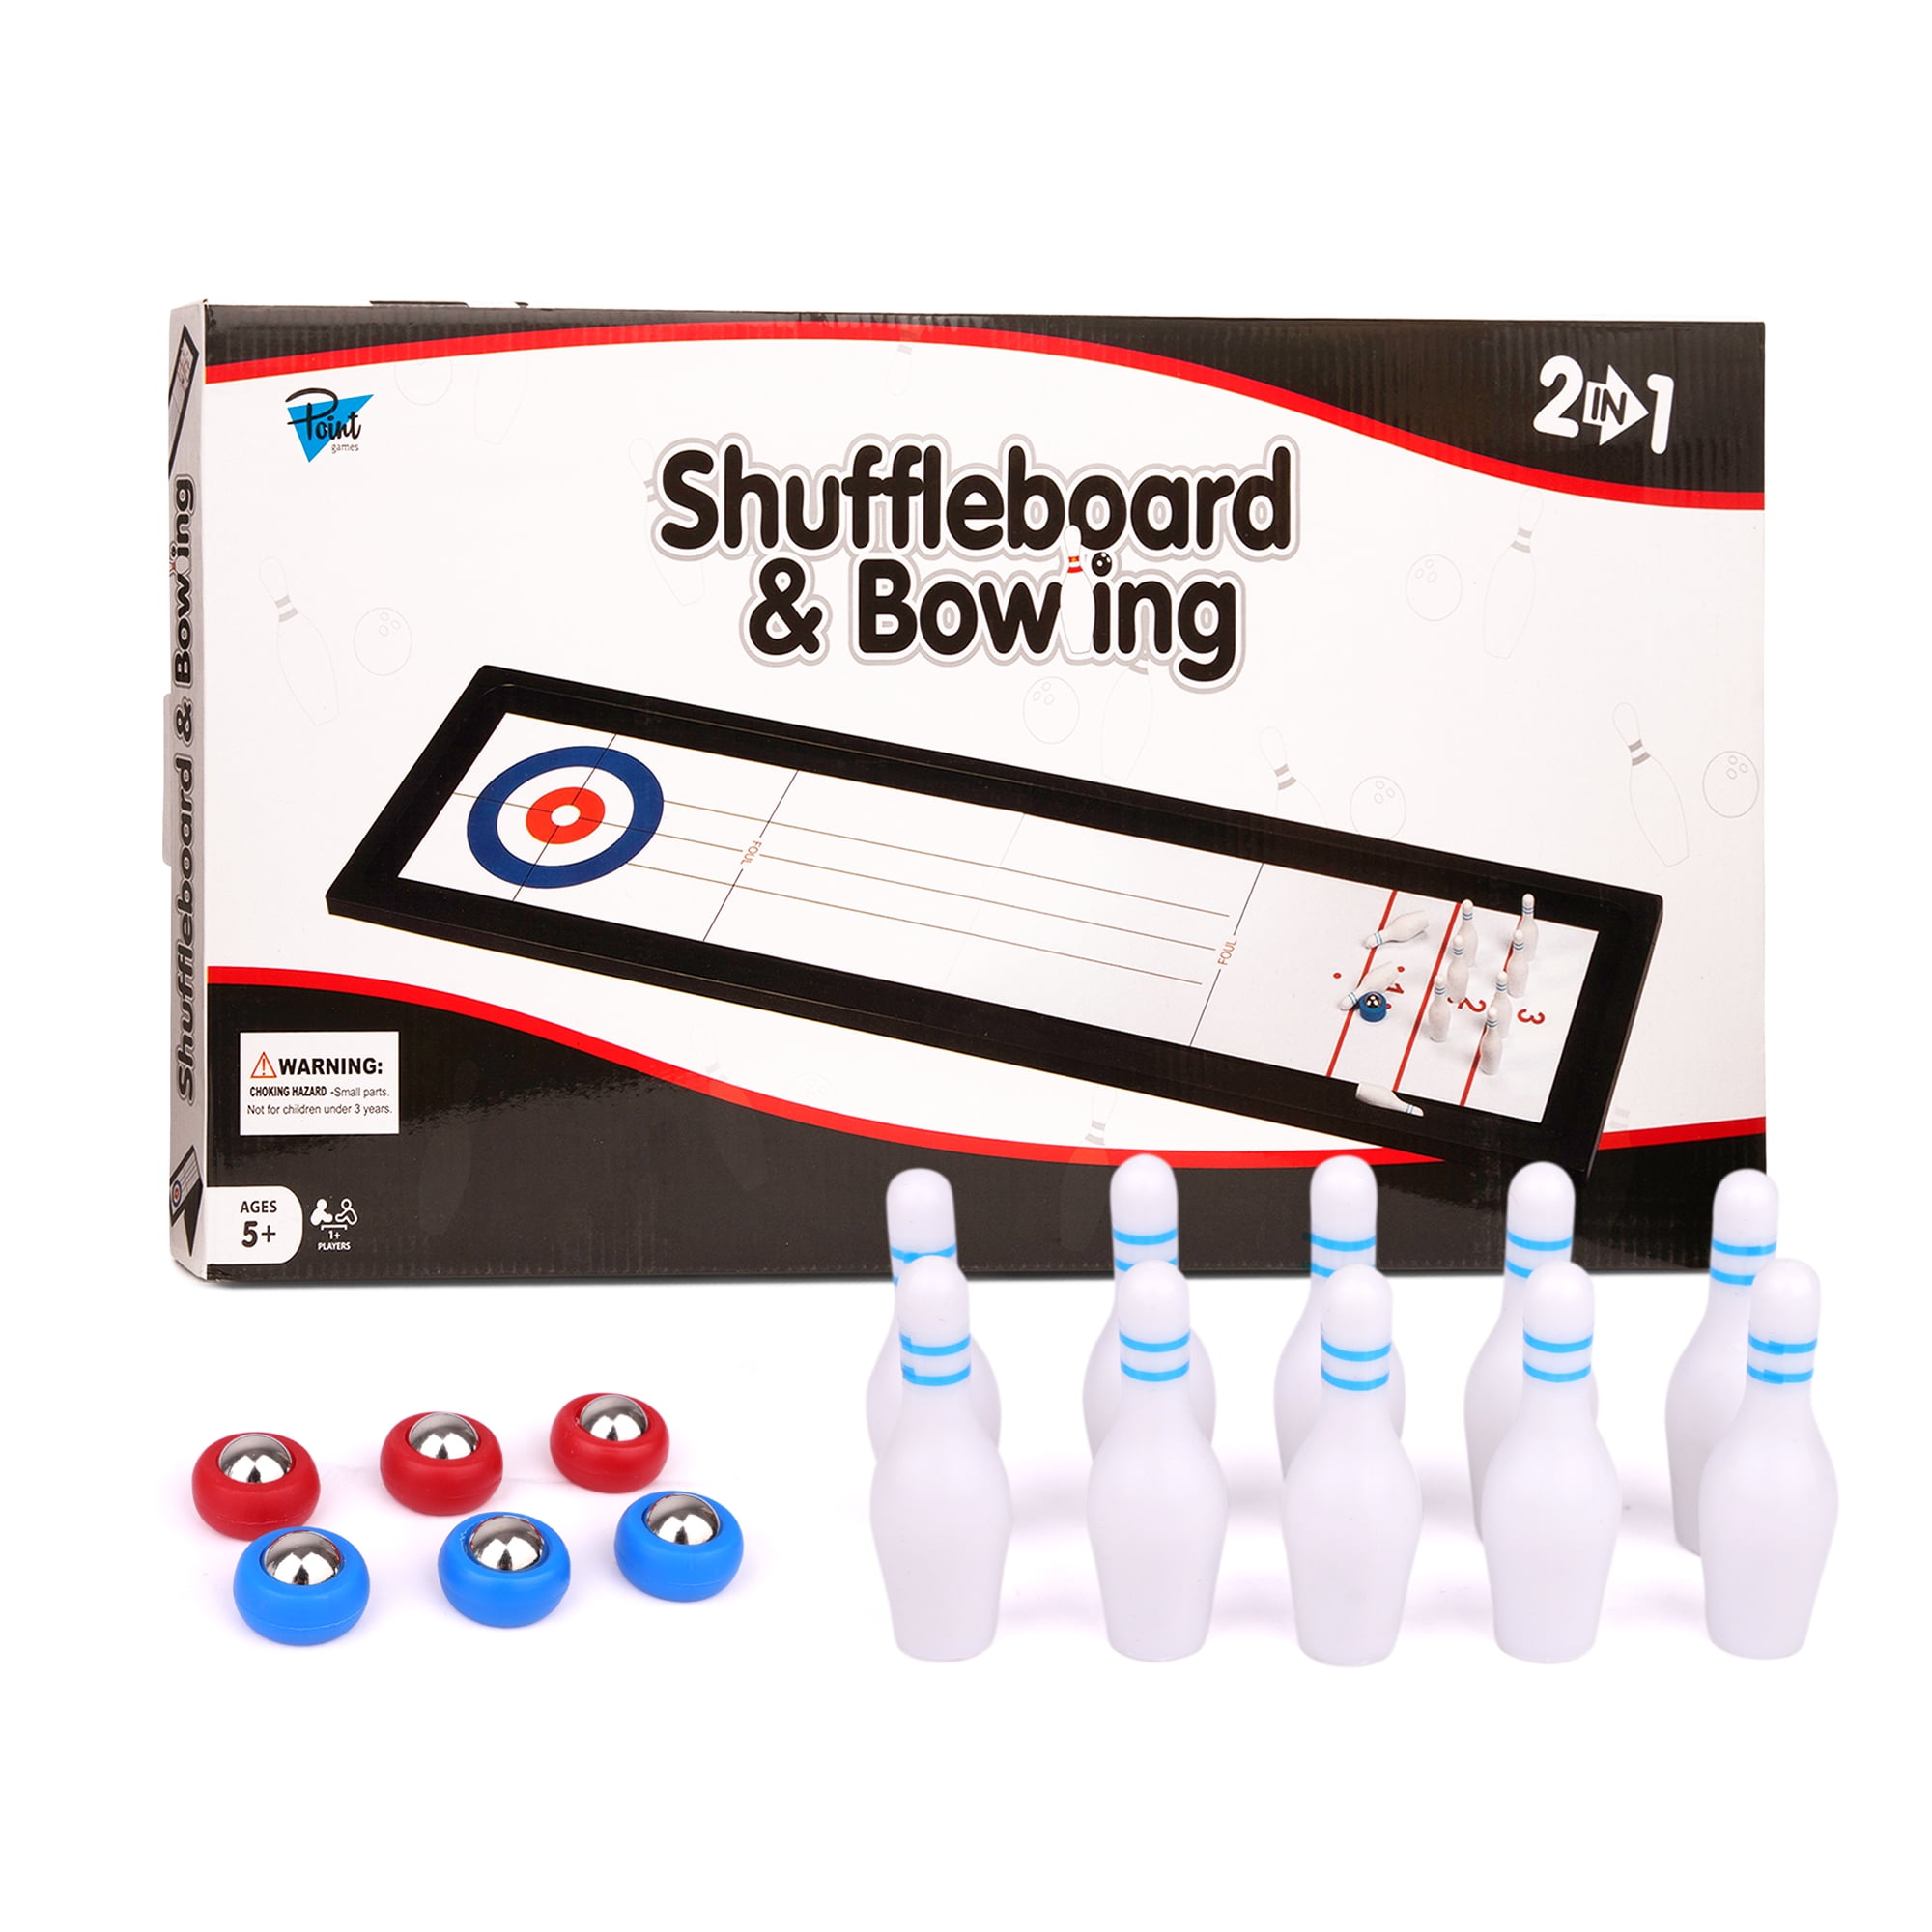 GOTHINK 3-in-1 Table Bowling Game - Mini Curling, Shuffleboard and Bowling  Set Perfect for Family Fun and Parties - Portable Mini Tabletop Games for